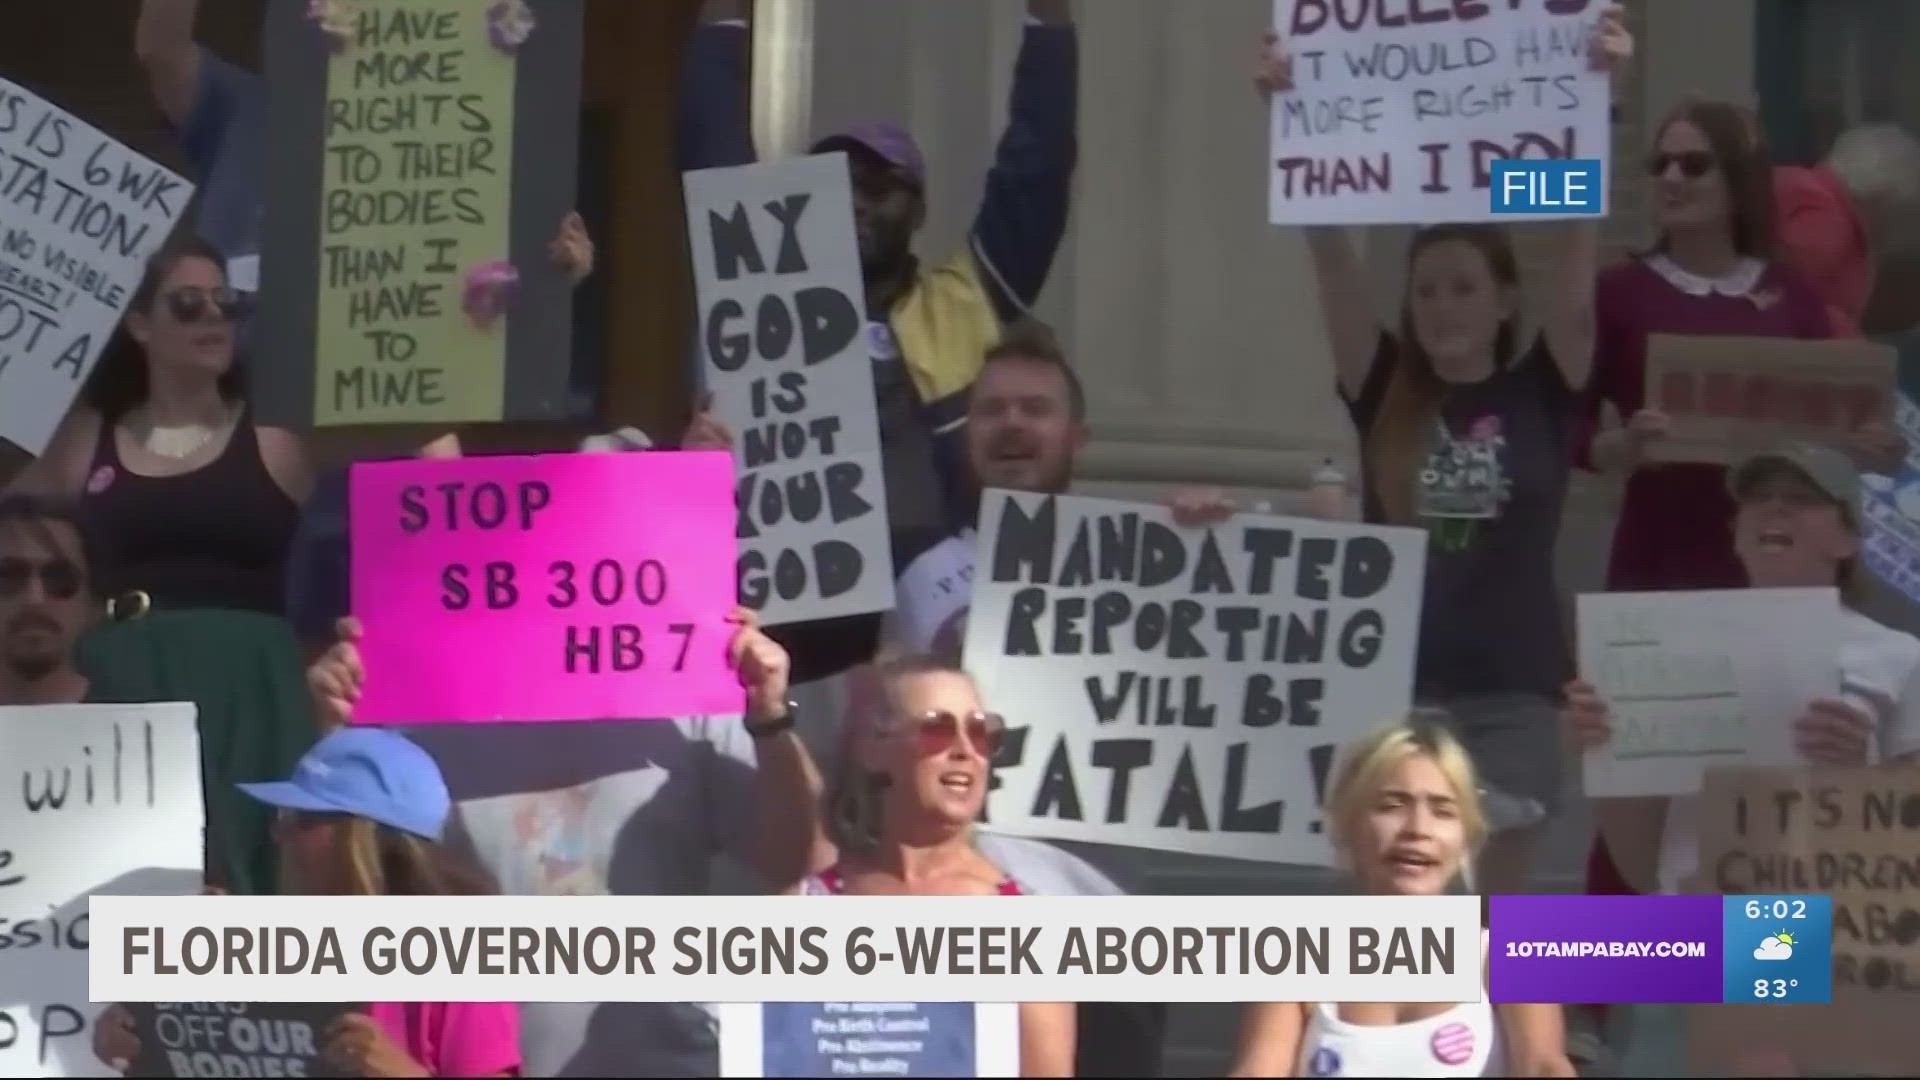 The tighter restrictions follow a 15-week abortion limit signed into law last year, which did not include exceptions for rape, incest or human trafficking.